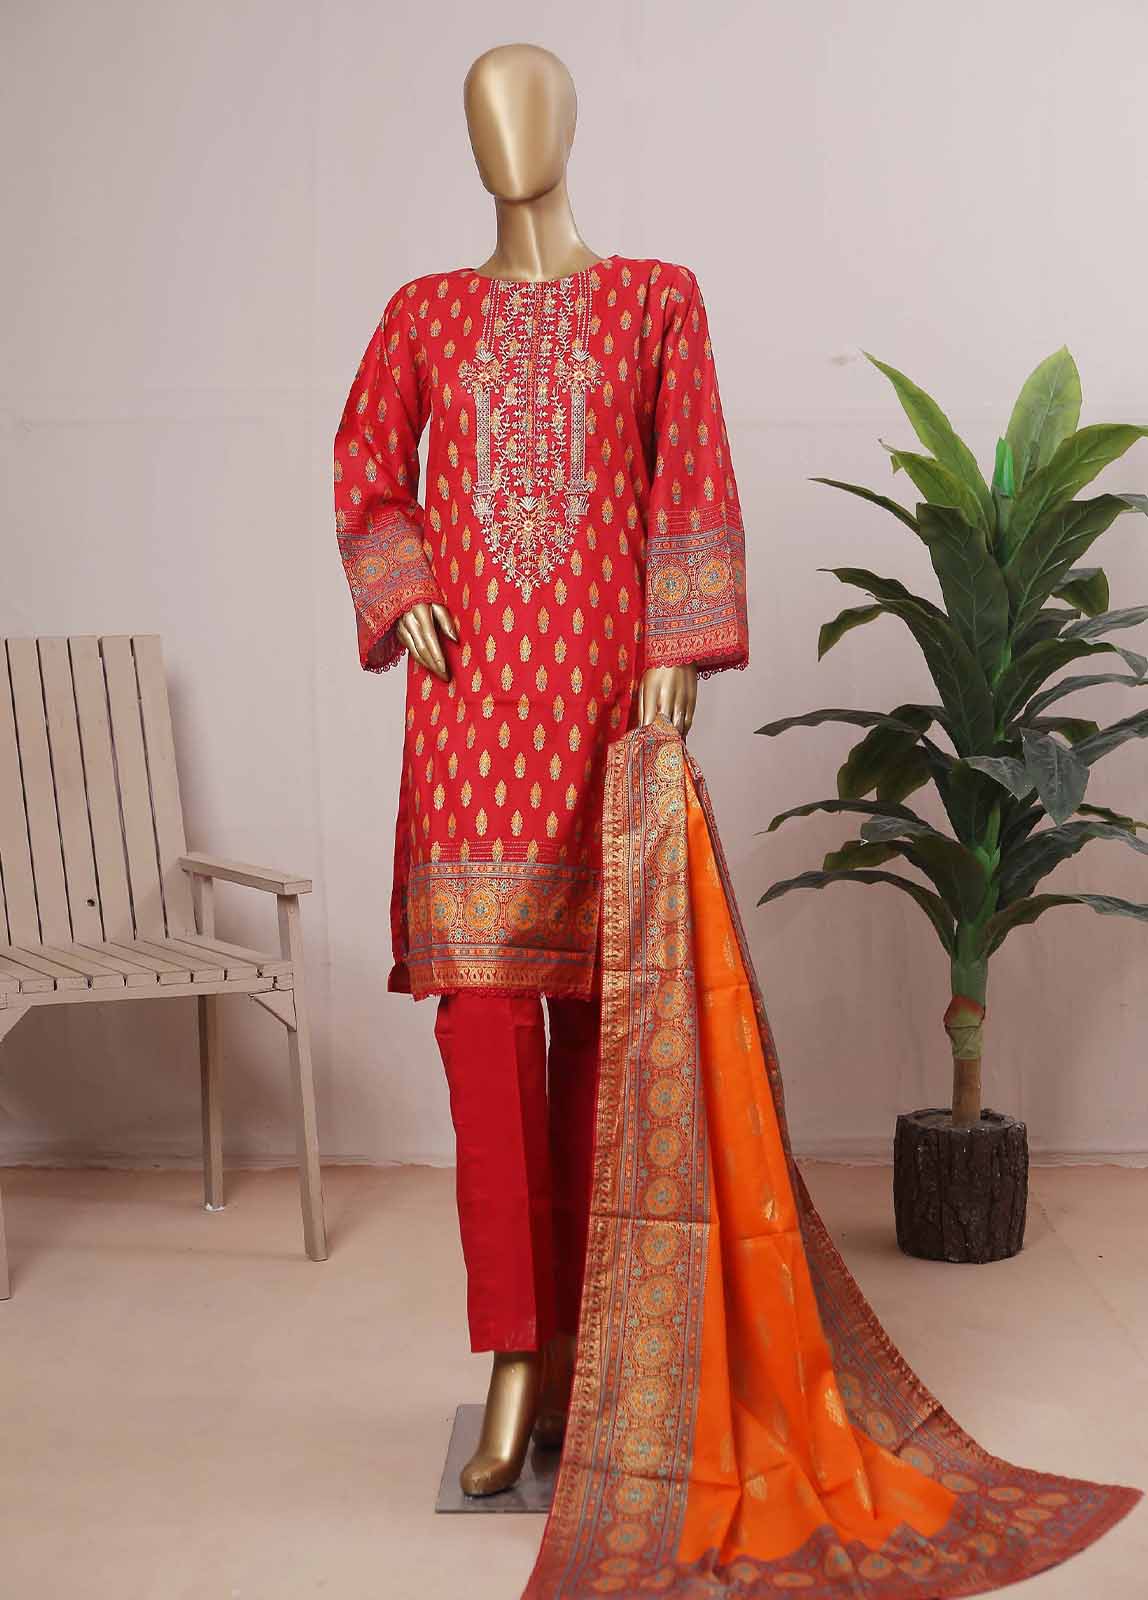 SMLE-0010-3 Piece Cotton Embroidered